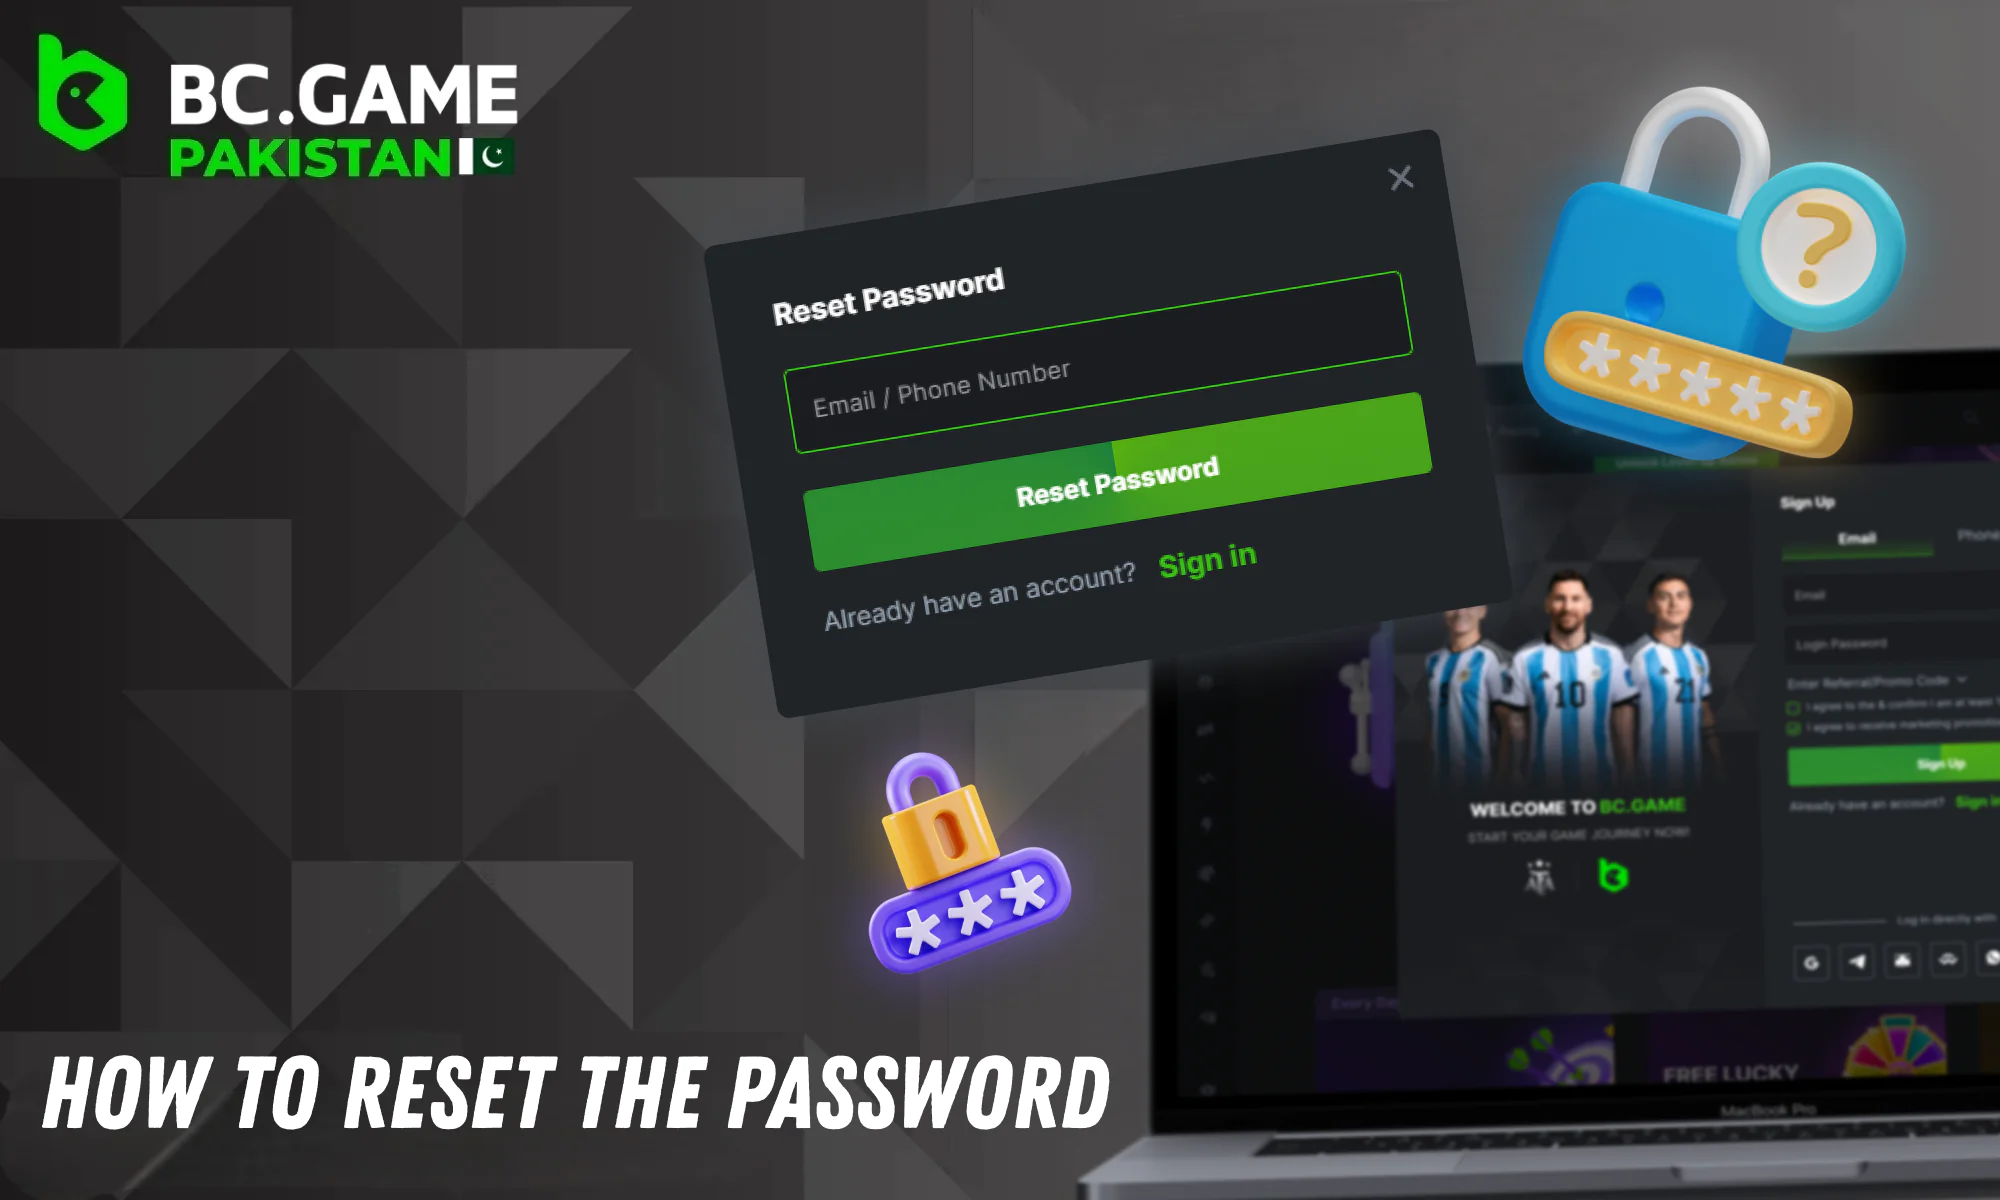 Easily reset your password on BC Game with step-by-step instruction